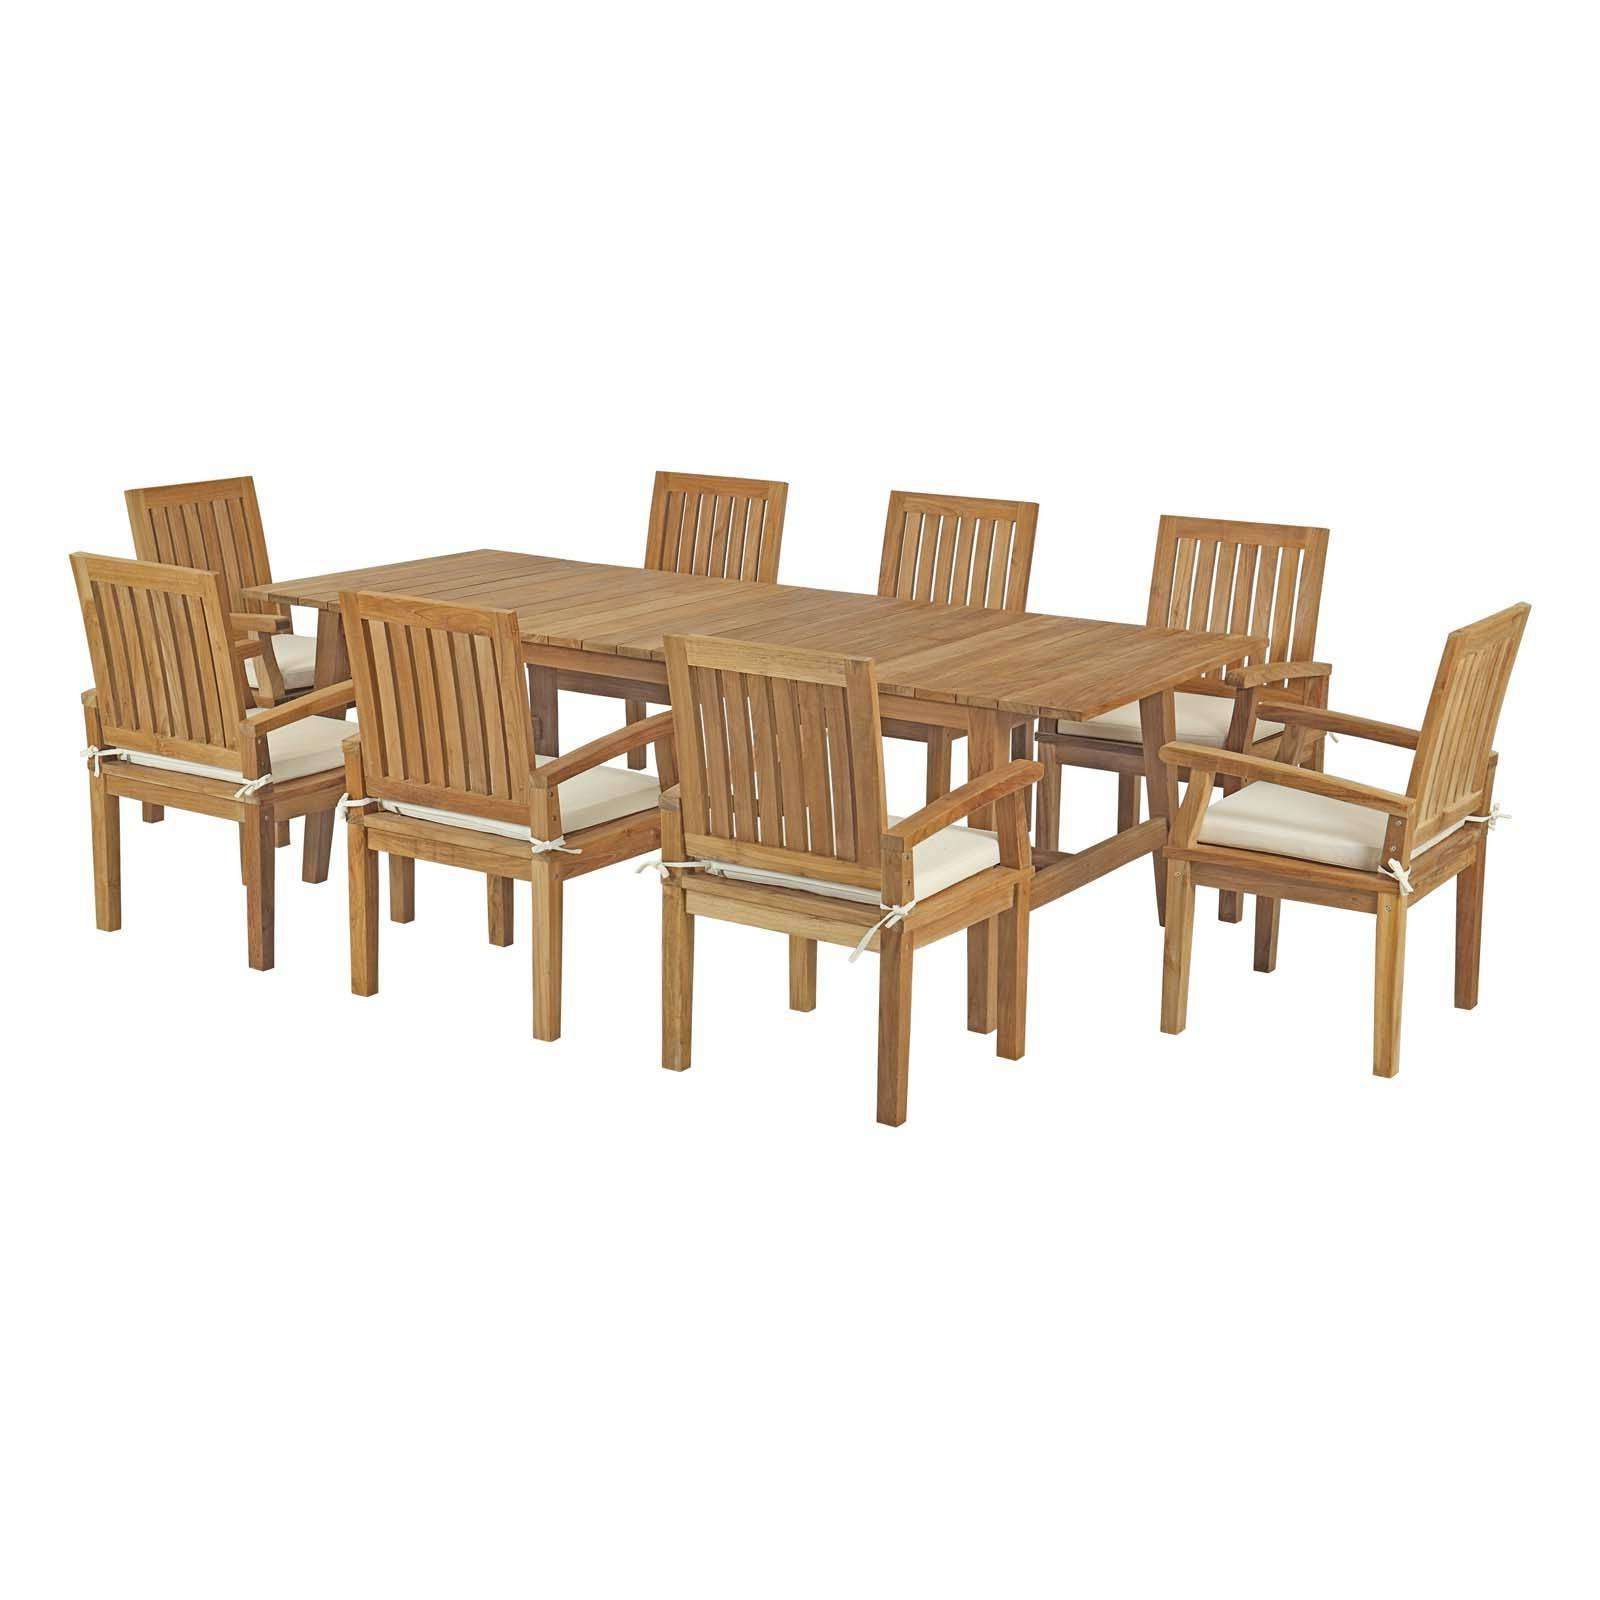 Modterior :: Outdoor :: Outdoor Sets :: Marina 9 Piece Outdoor Patio Within Most Recent 9 Piece Teak Wood Outdoor Dining Sets (View 15 of 15)